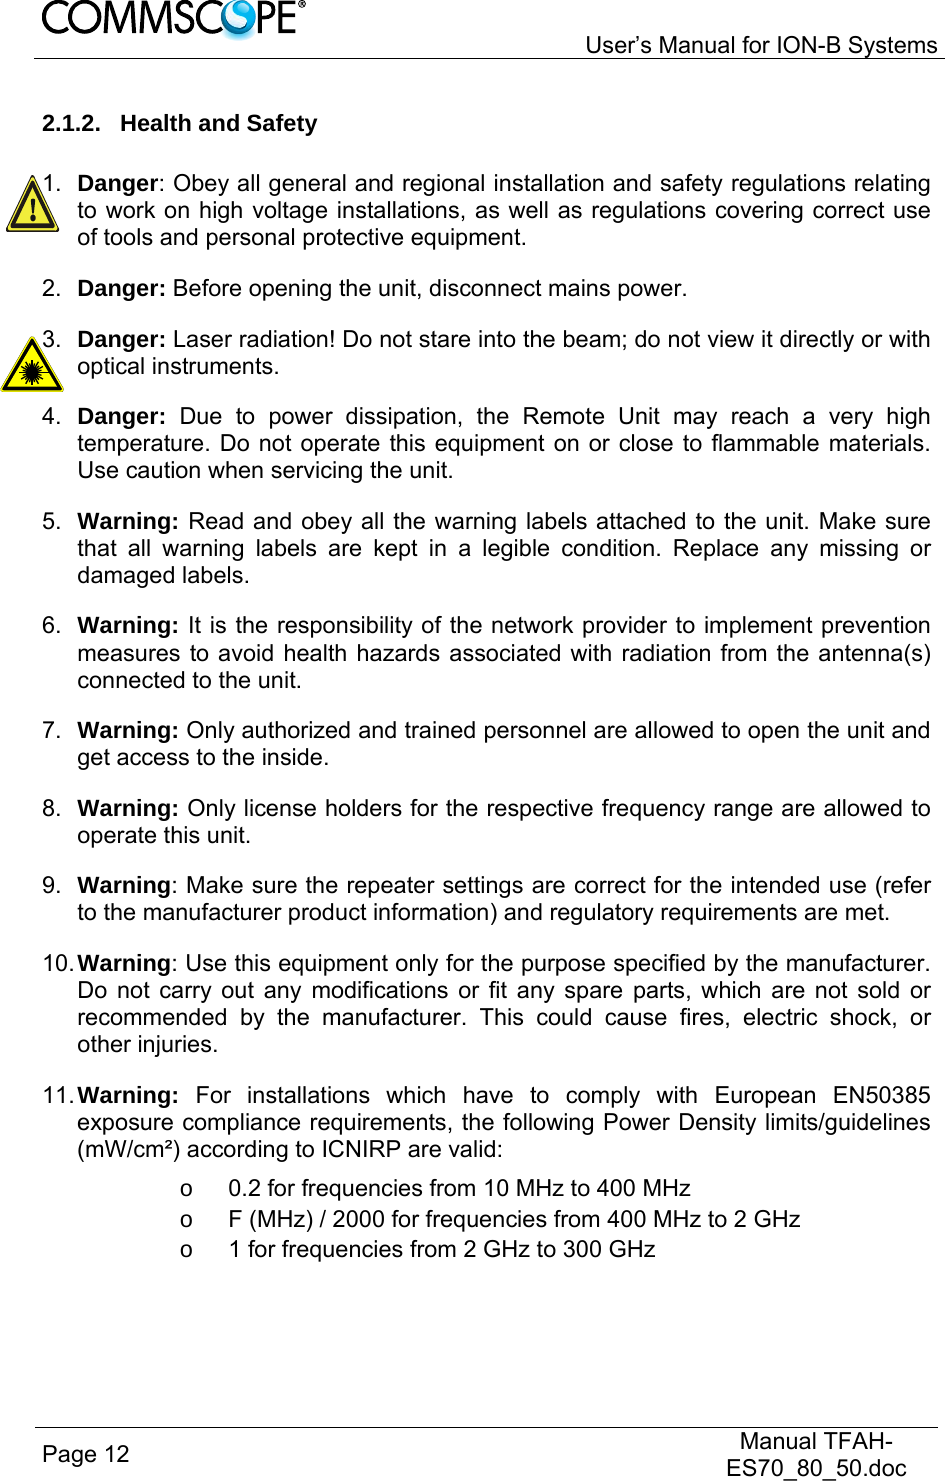   User’s Manual for ION-B Systems Page 12   Manual TFAH-ES70_80_50.doc  2.1.2. Health and Safety  1.  Danger: Obey all general and regional installation and safety regulations relating to work on high voltage installations, as well as regulations covering correct use of tools and personal protective equipment. 2.  Danger: Before opening the unit, disconnect mains power. 3.  Danger: Laser radiation! Do not stare into the beam; do not view it directly or with optical instruments. 4.  Danger:  Due to power dissipation, the Remote Unit may reach a very high temperature. Do not operate this equipment on or close to flammable materials. Use caution when servicing the unit. 5.  Warning: Read and obey all the warning labels attached to the unit. Make sure that all warning labels are kept in a legible condition. Replace any missing or damaged labels. 6.  Warning: It is the responsibility of the network provider to implement prevention measures to avoid health hazards associated with radiation from the antenna(s) connected to the unit. 7.  Warning: Only authorized and trained personnel are allowed to open the unit and get access to the inside. 8.  Warning: Only license holders for the respective frequency range are allowed to operate this unit. 9.  Warning: Make sure the repeater settings are correct for the intended use (refer to the manufacturer product information) and regulatory requirements are met. 10. Warning: Use this equipment only for the purpose specified by the manufacturer. Do not carry out any modifications or fit any spare parts, which are not sold or recommended by the manufacturer. This could cause fires, electric shock, or other injuries. 11. Warning: For installations which have to comply with European EN50385 exposure compliance requirements, the following Power Density limits/guidelines (mW/cm²) according to ICNIRP are valid: o  0.2 for frequencies from 10 MHz to 400 MHz o  F (MHz) / 2000 for frequencies from 400 MHz to 2 GHz o  1 for frequencies from 2 GHz to 300 GHz 